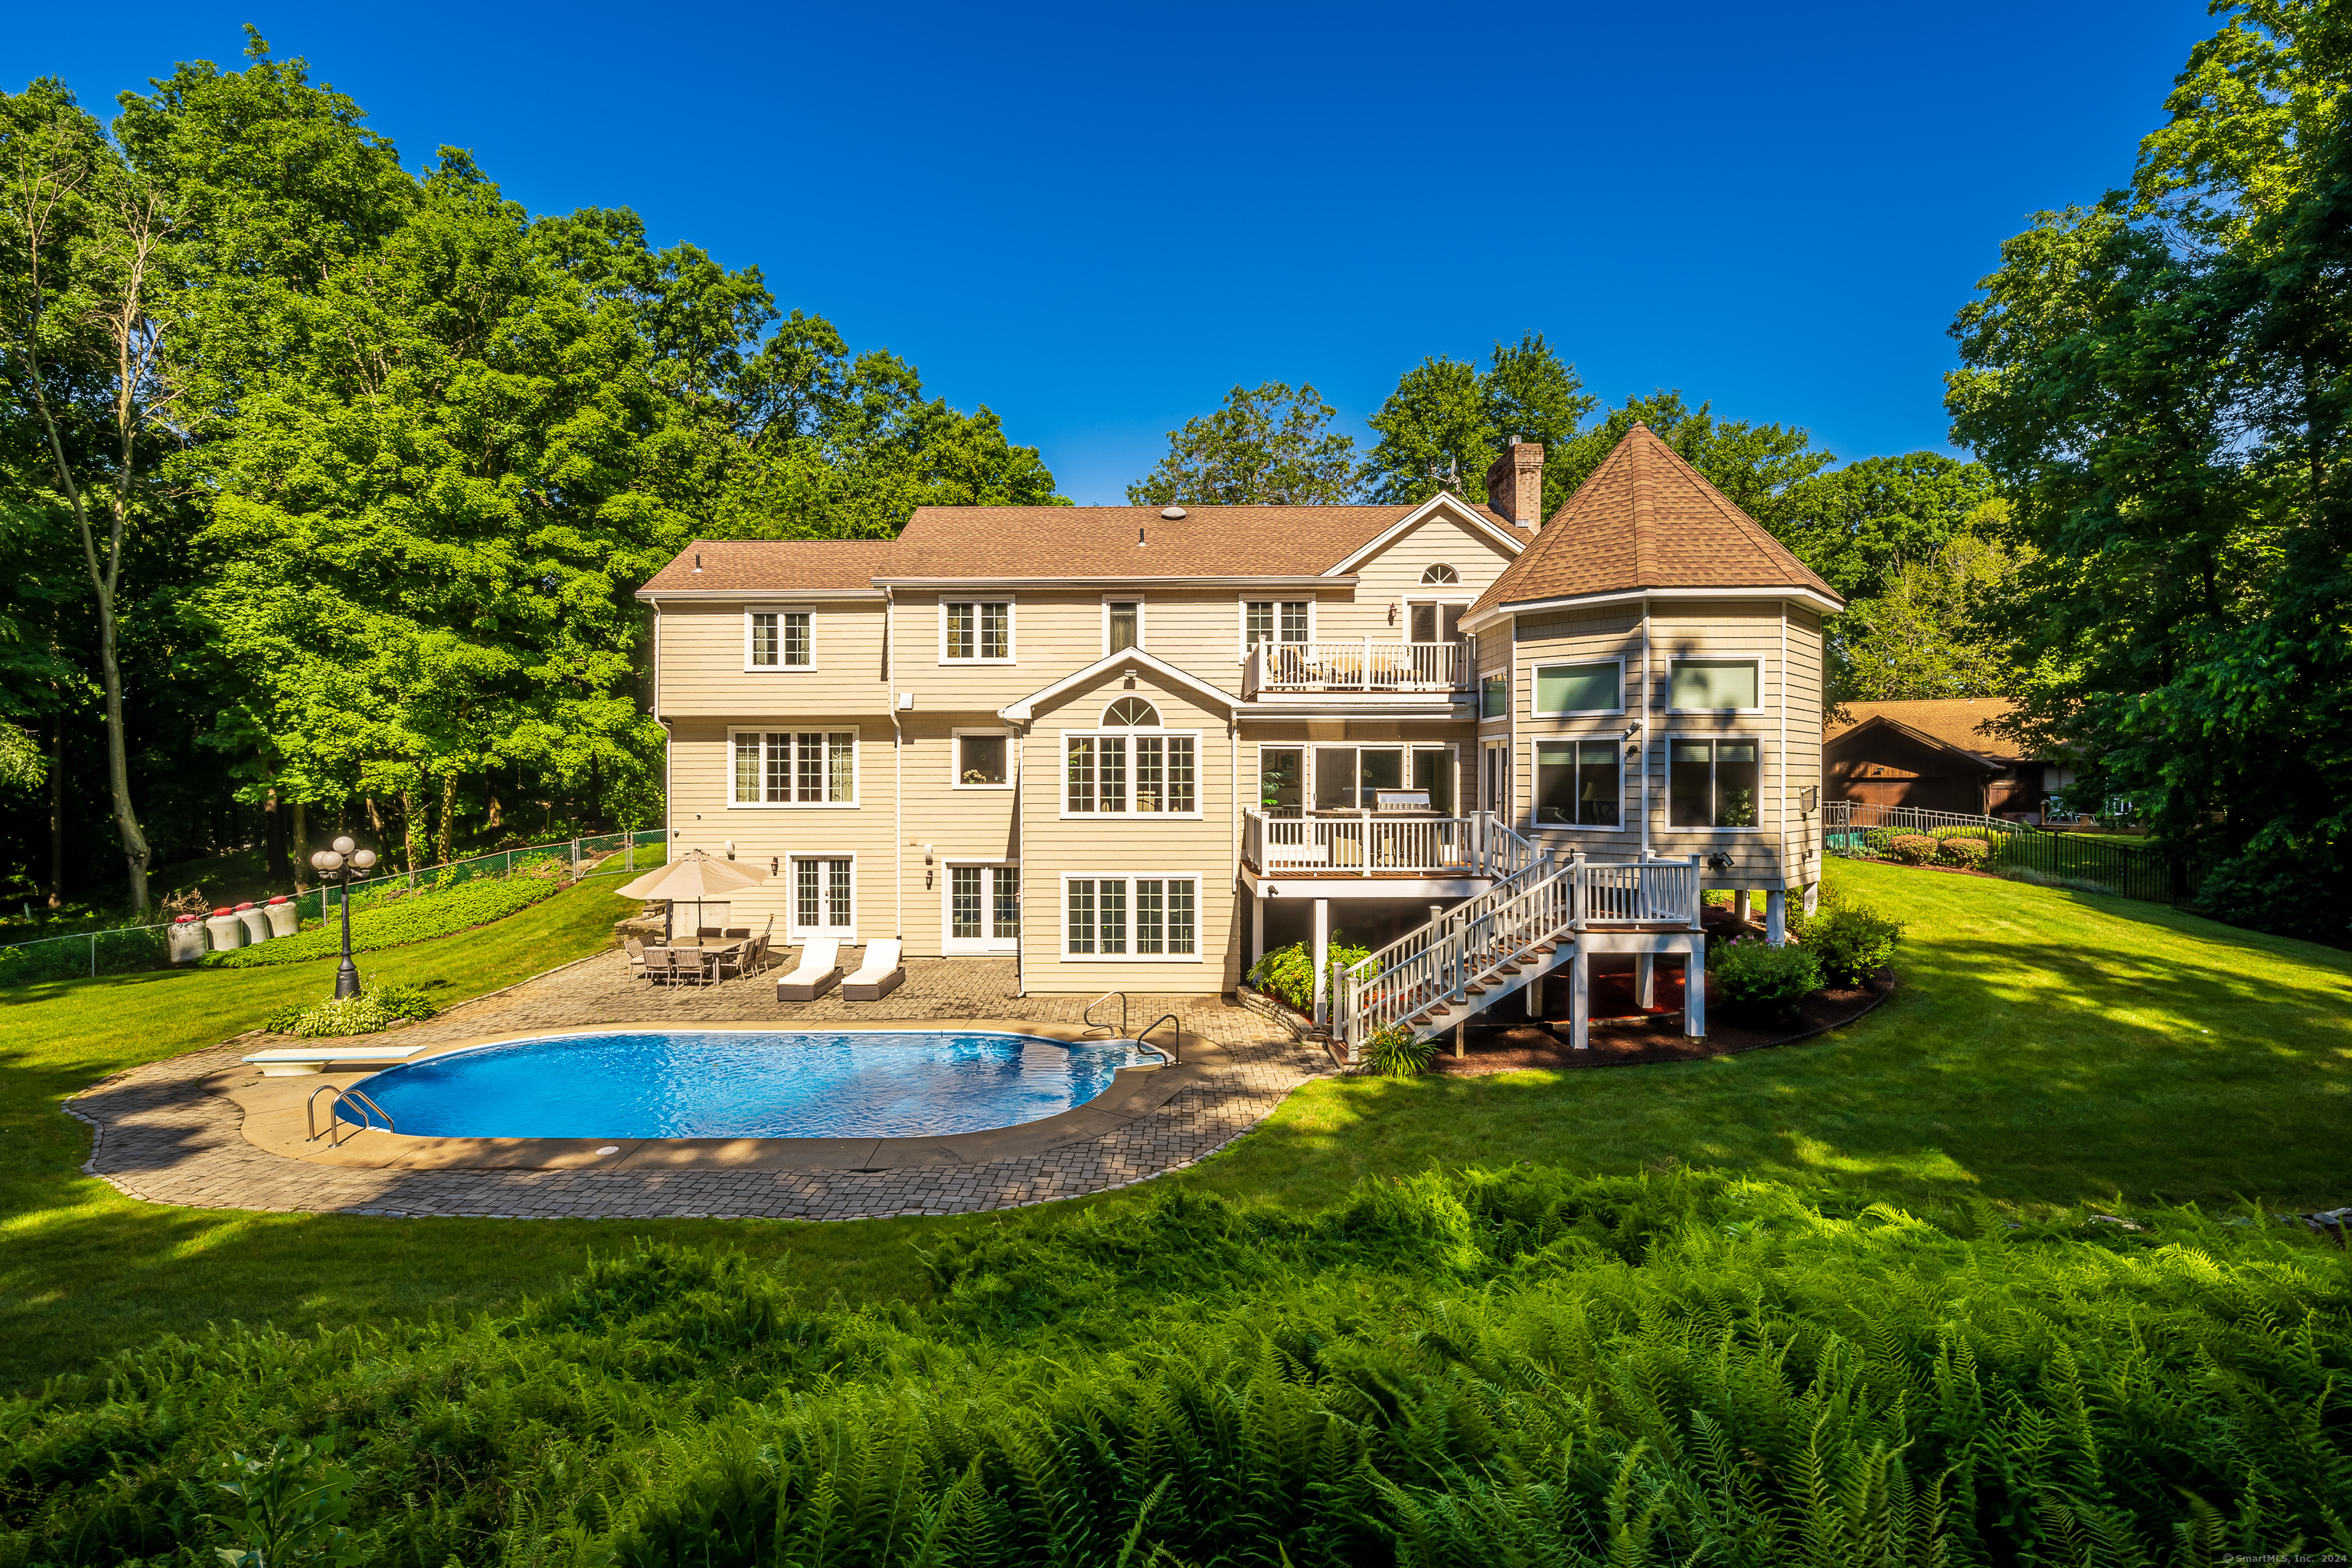 Property for Sale at 723 Laurie Lane, Orange, Connecticut - Bedrooms: 4 
Bathrooms: 4 
Rooms: 9  - $1,560,000